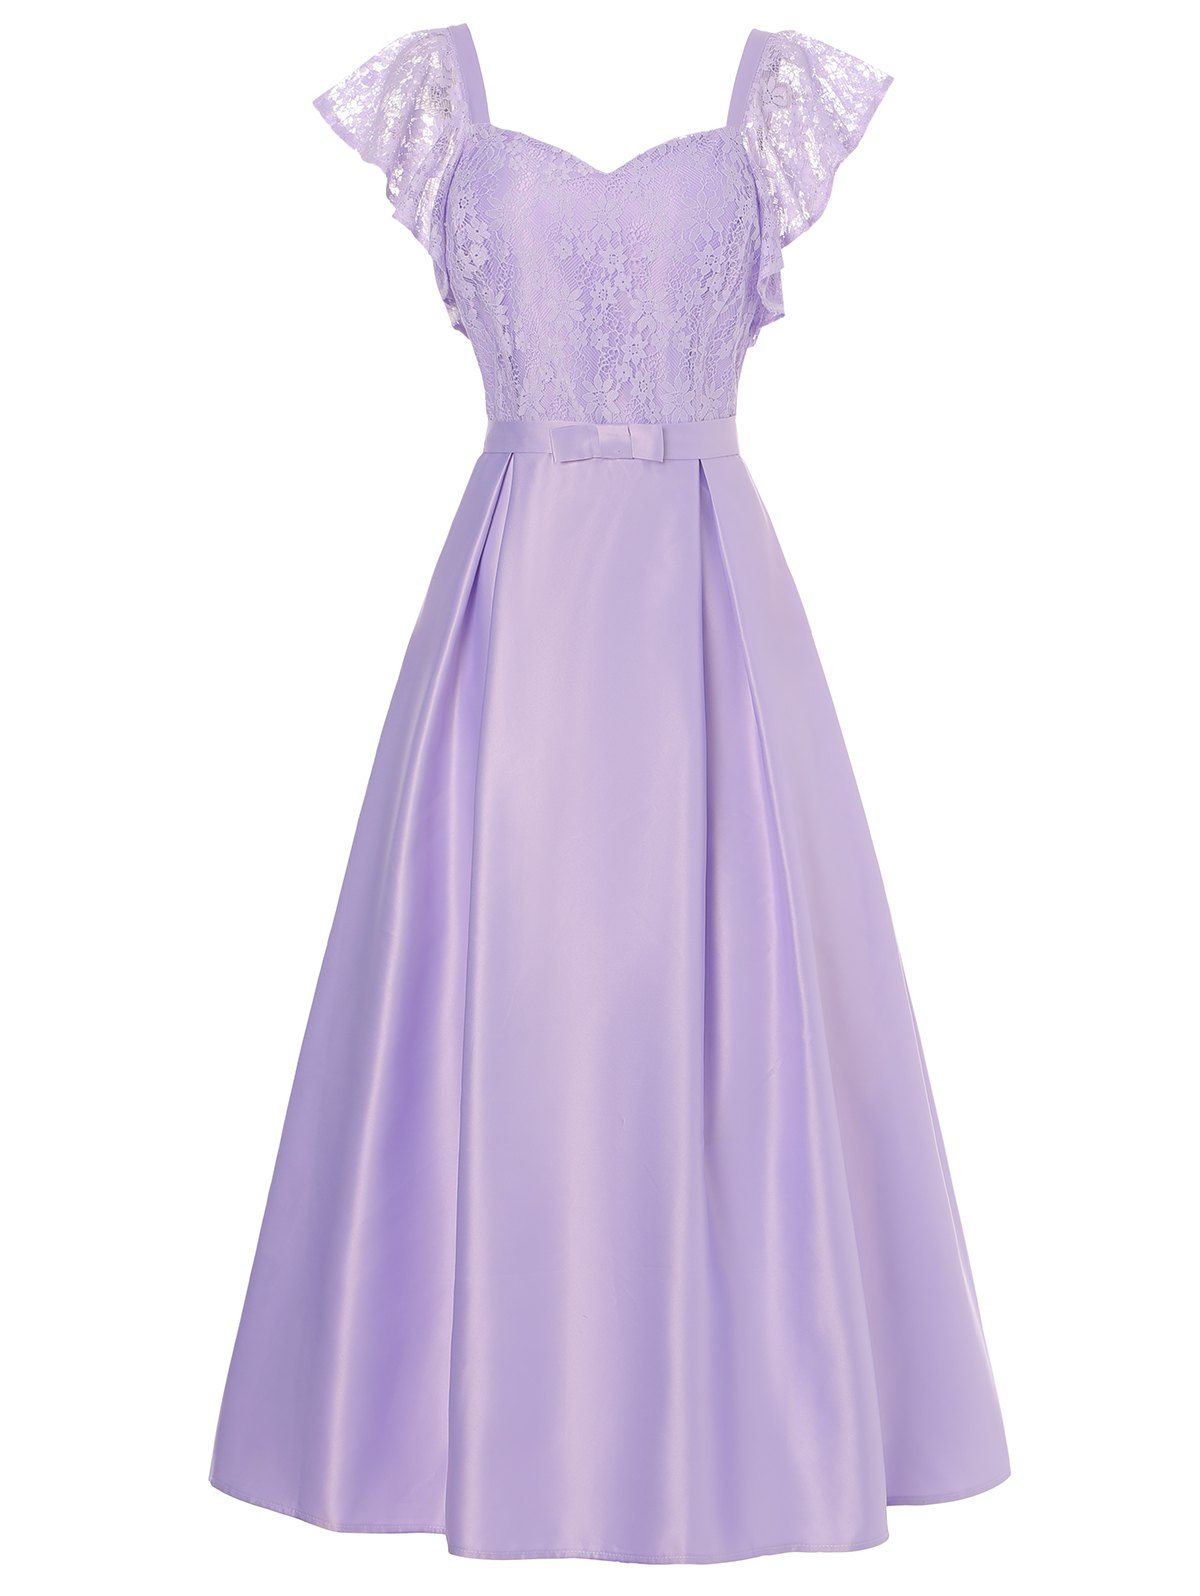 Party Midi Dress Hollow Out Flower Lace Panel Flutter Sleeve High Waist Bowknot Self Belted Prom Dress - LIGHT PURPLE XL